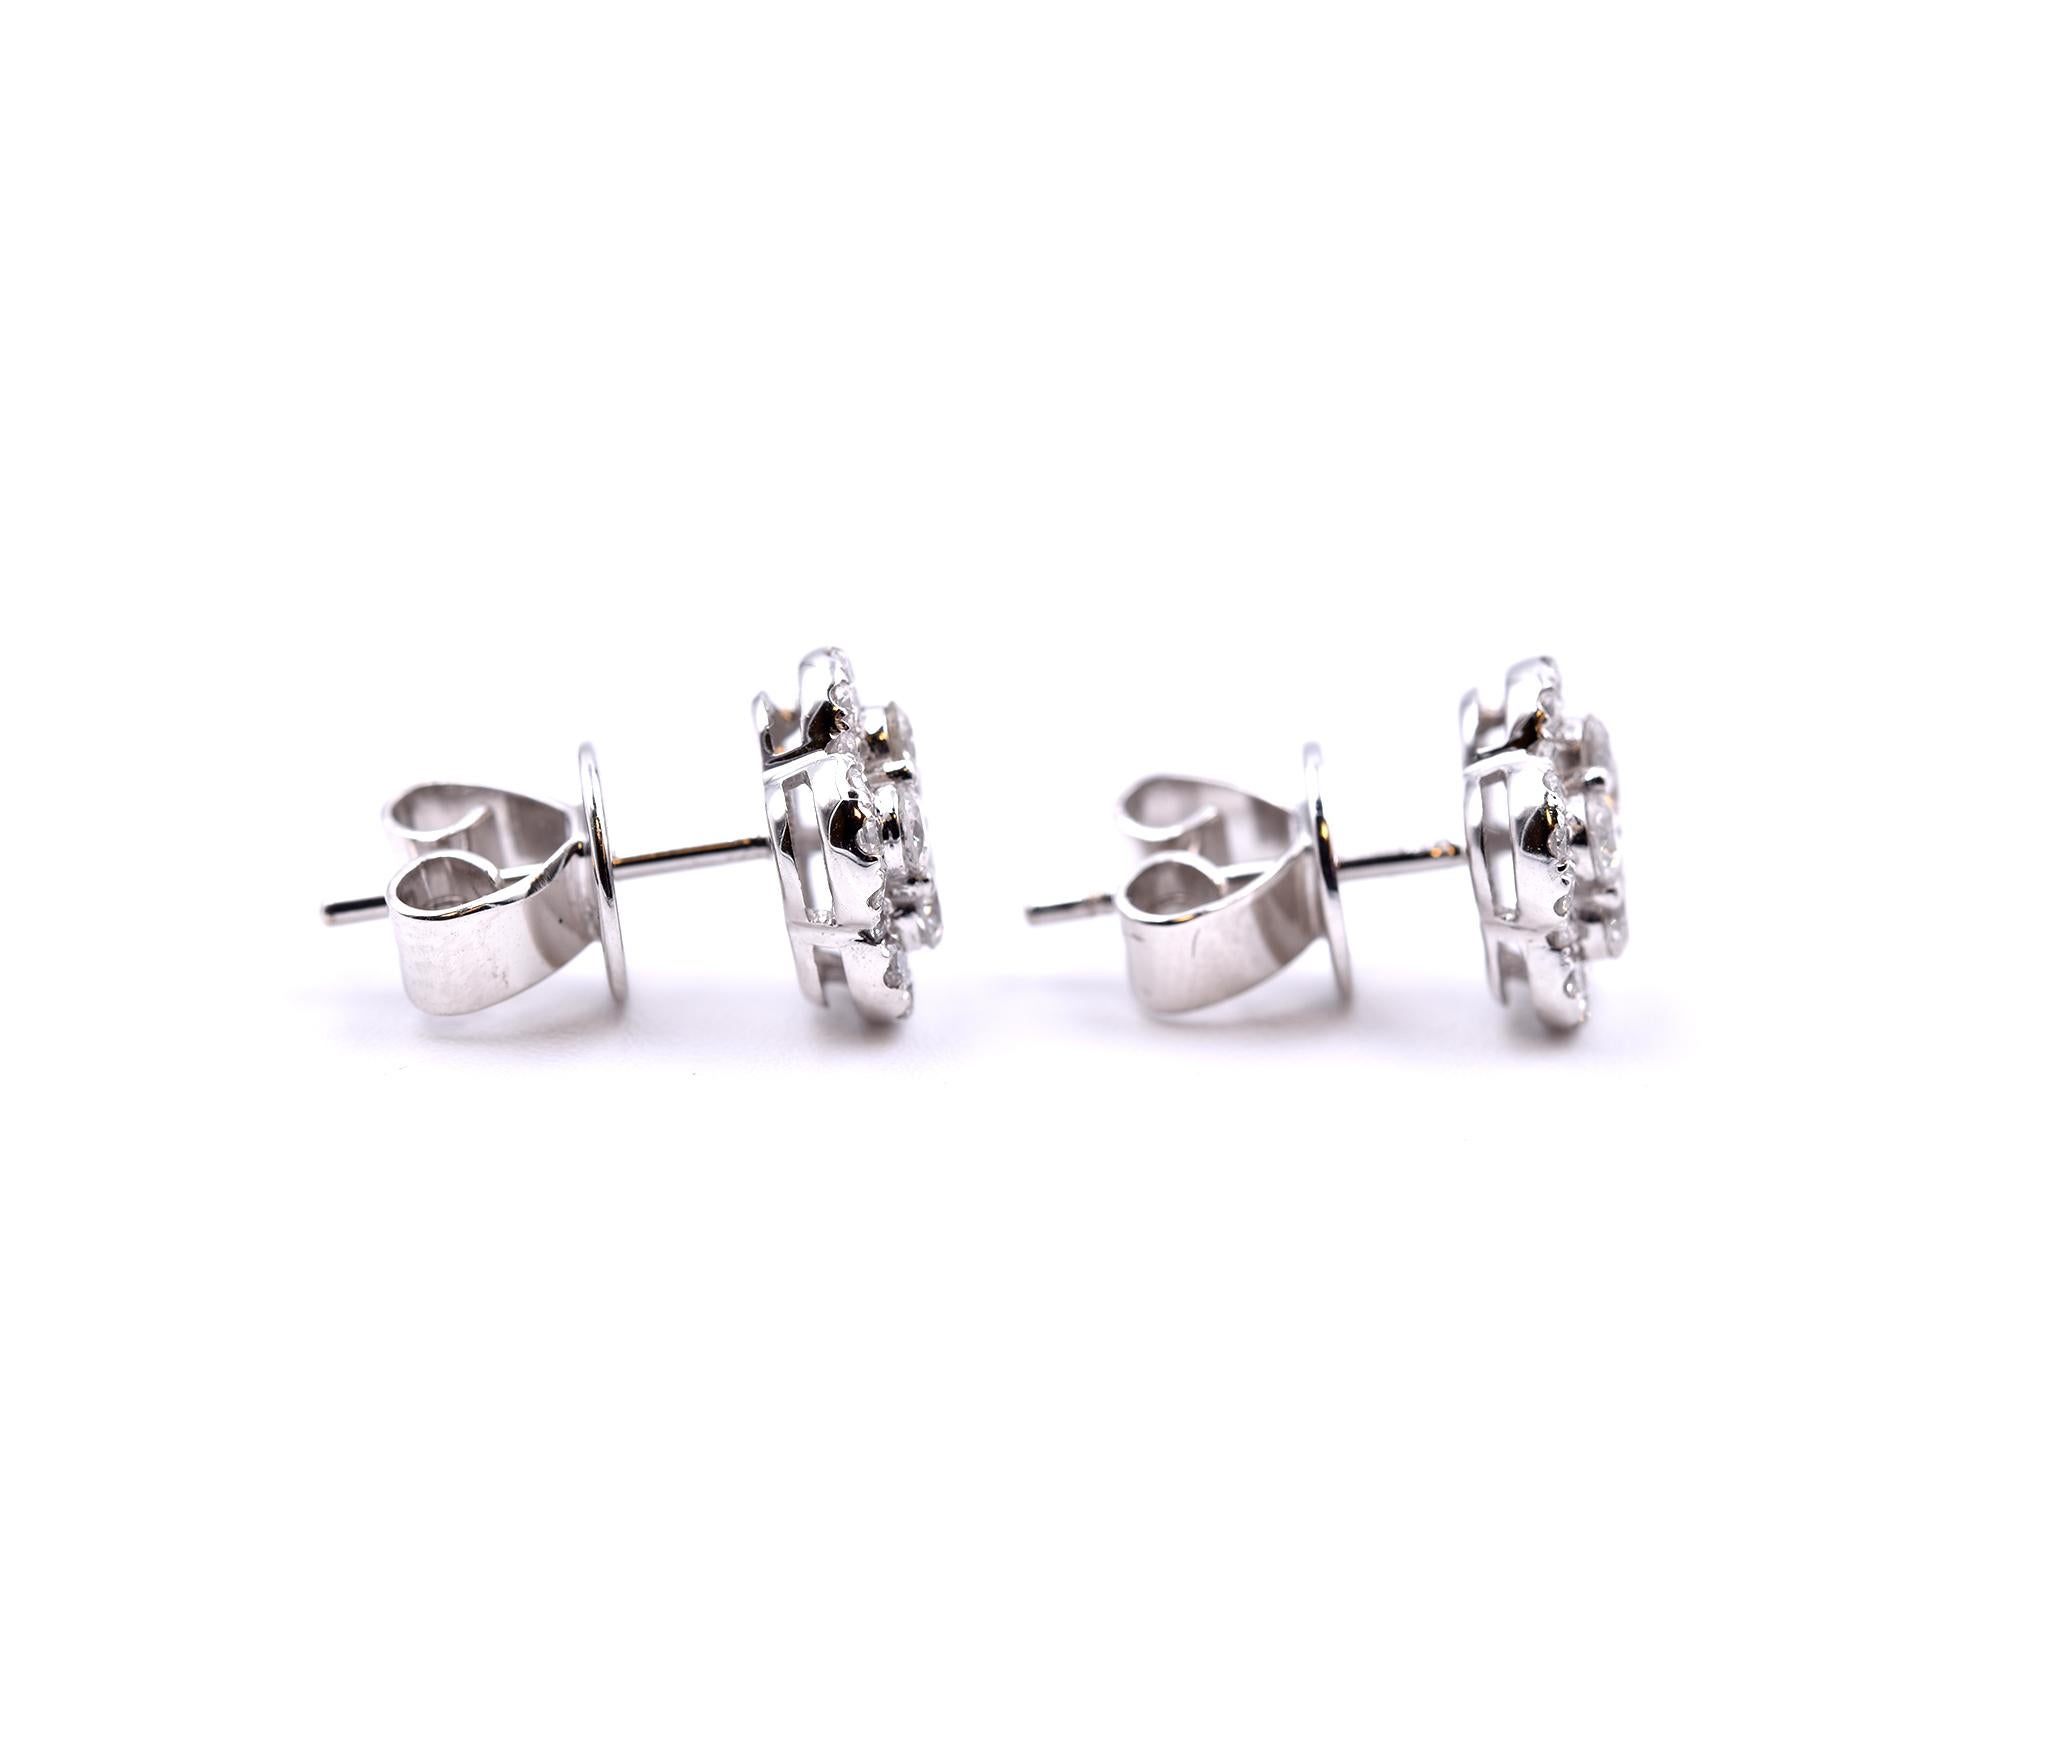 Designer: custom designed
Material: 18k white gold
Diamonds: 56 round brilliant cut= 0.35cttw
Color: G
Clarity: VS
Dimensions: earrings are approximately 9mm in diameter
Fastenings: post with friction backs
Weight: 2.90 grams
